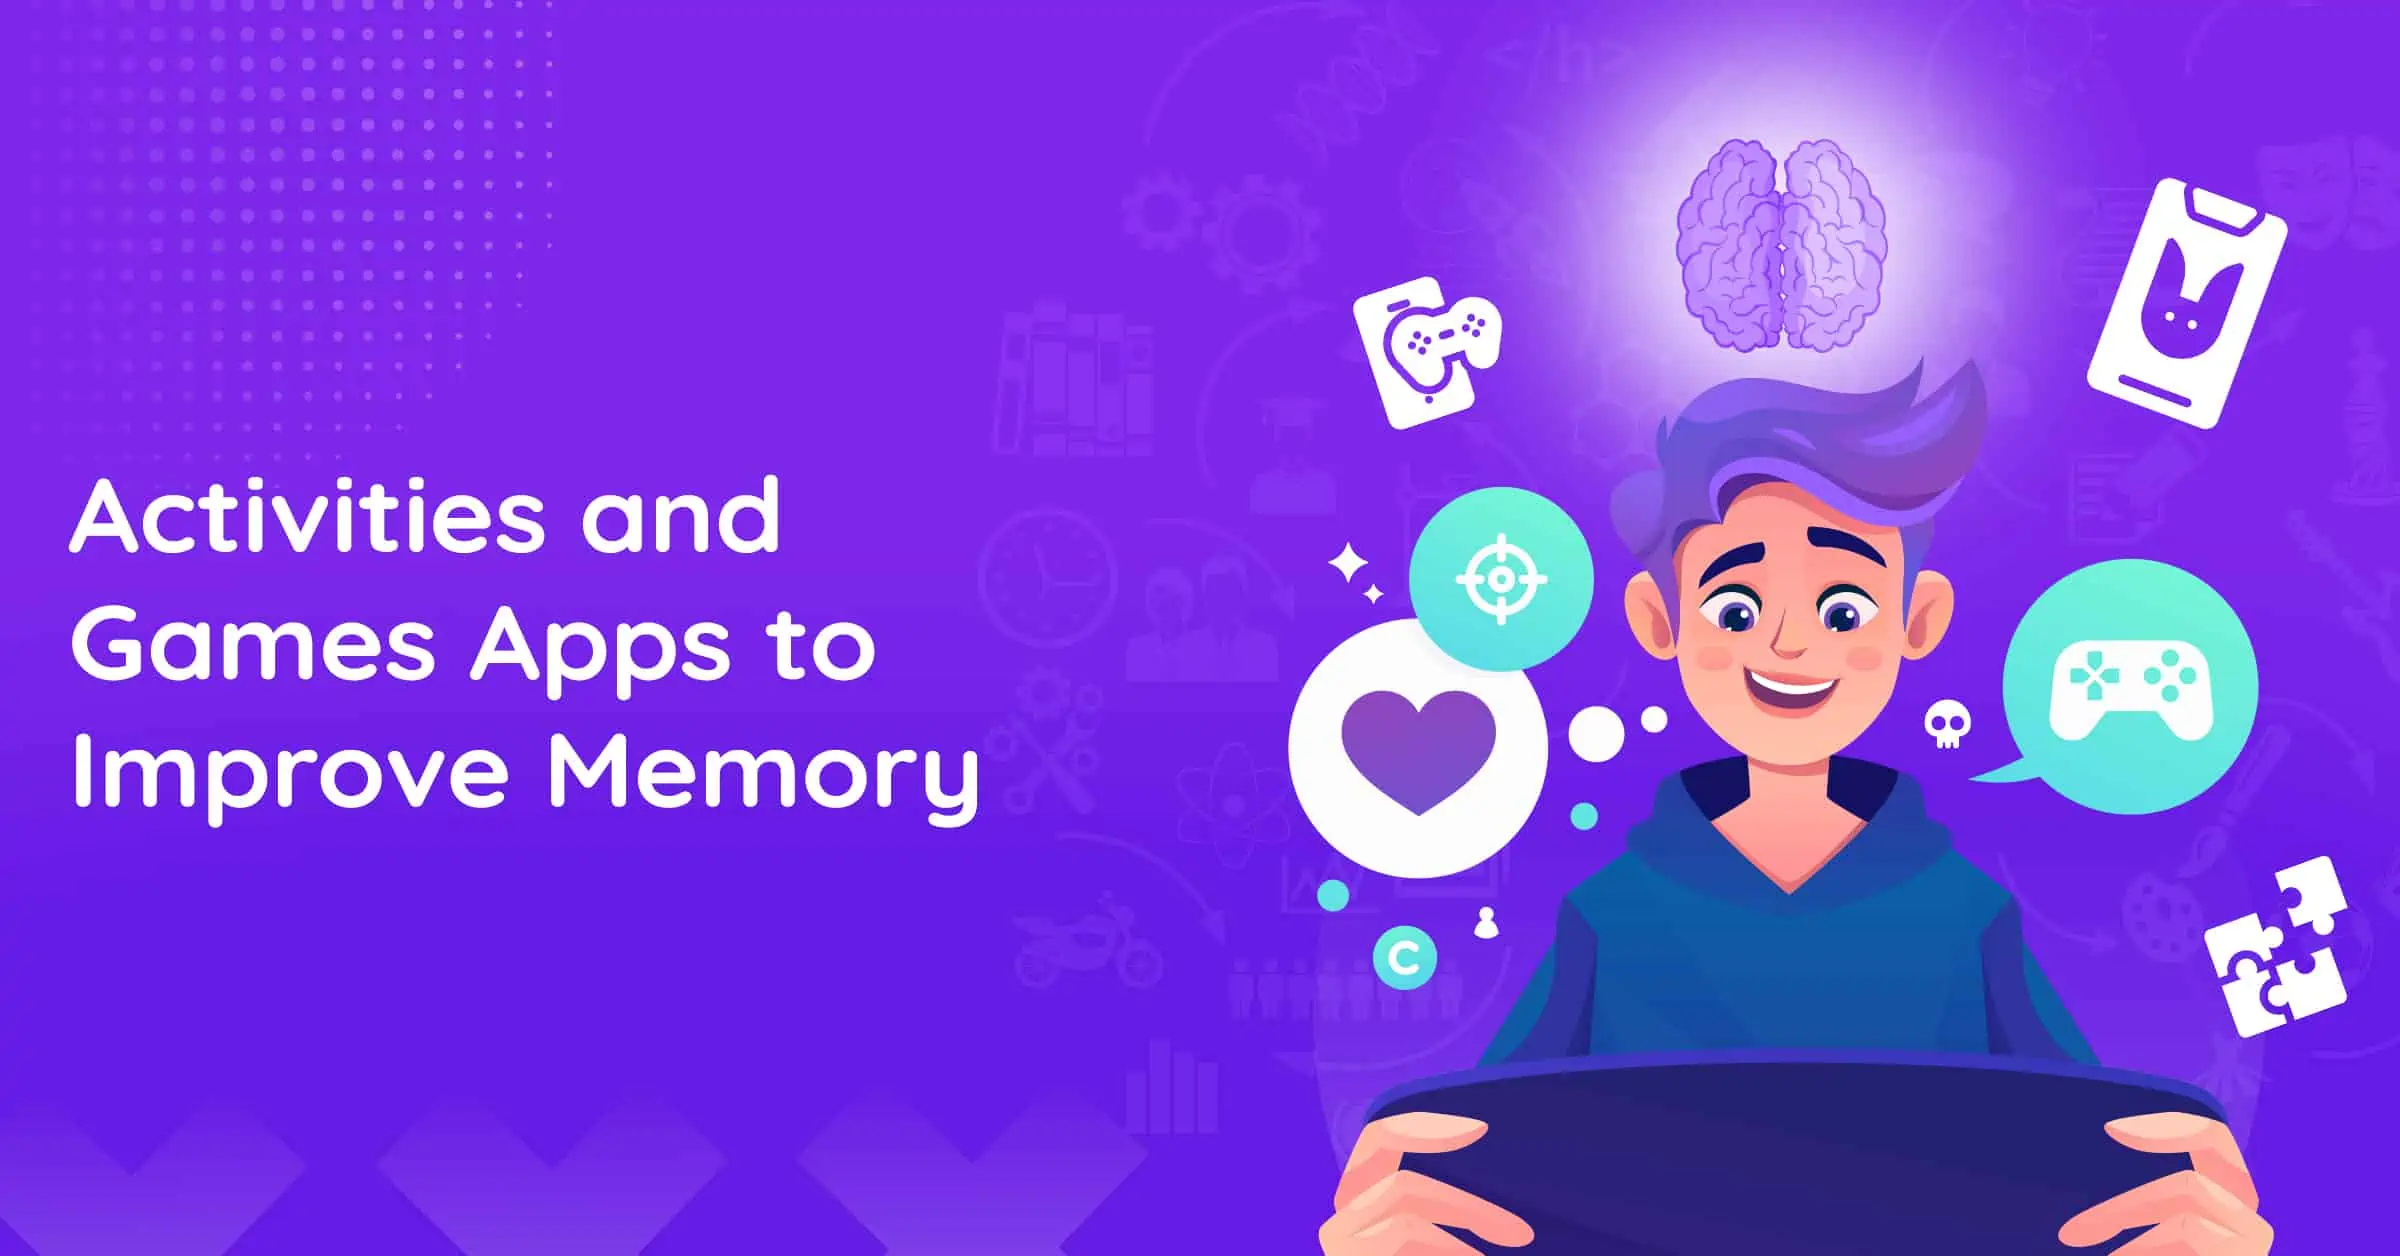 Featured image of the blog that lists down apps for improving memory of users. These are the activities and engaging games